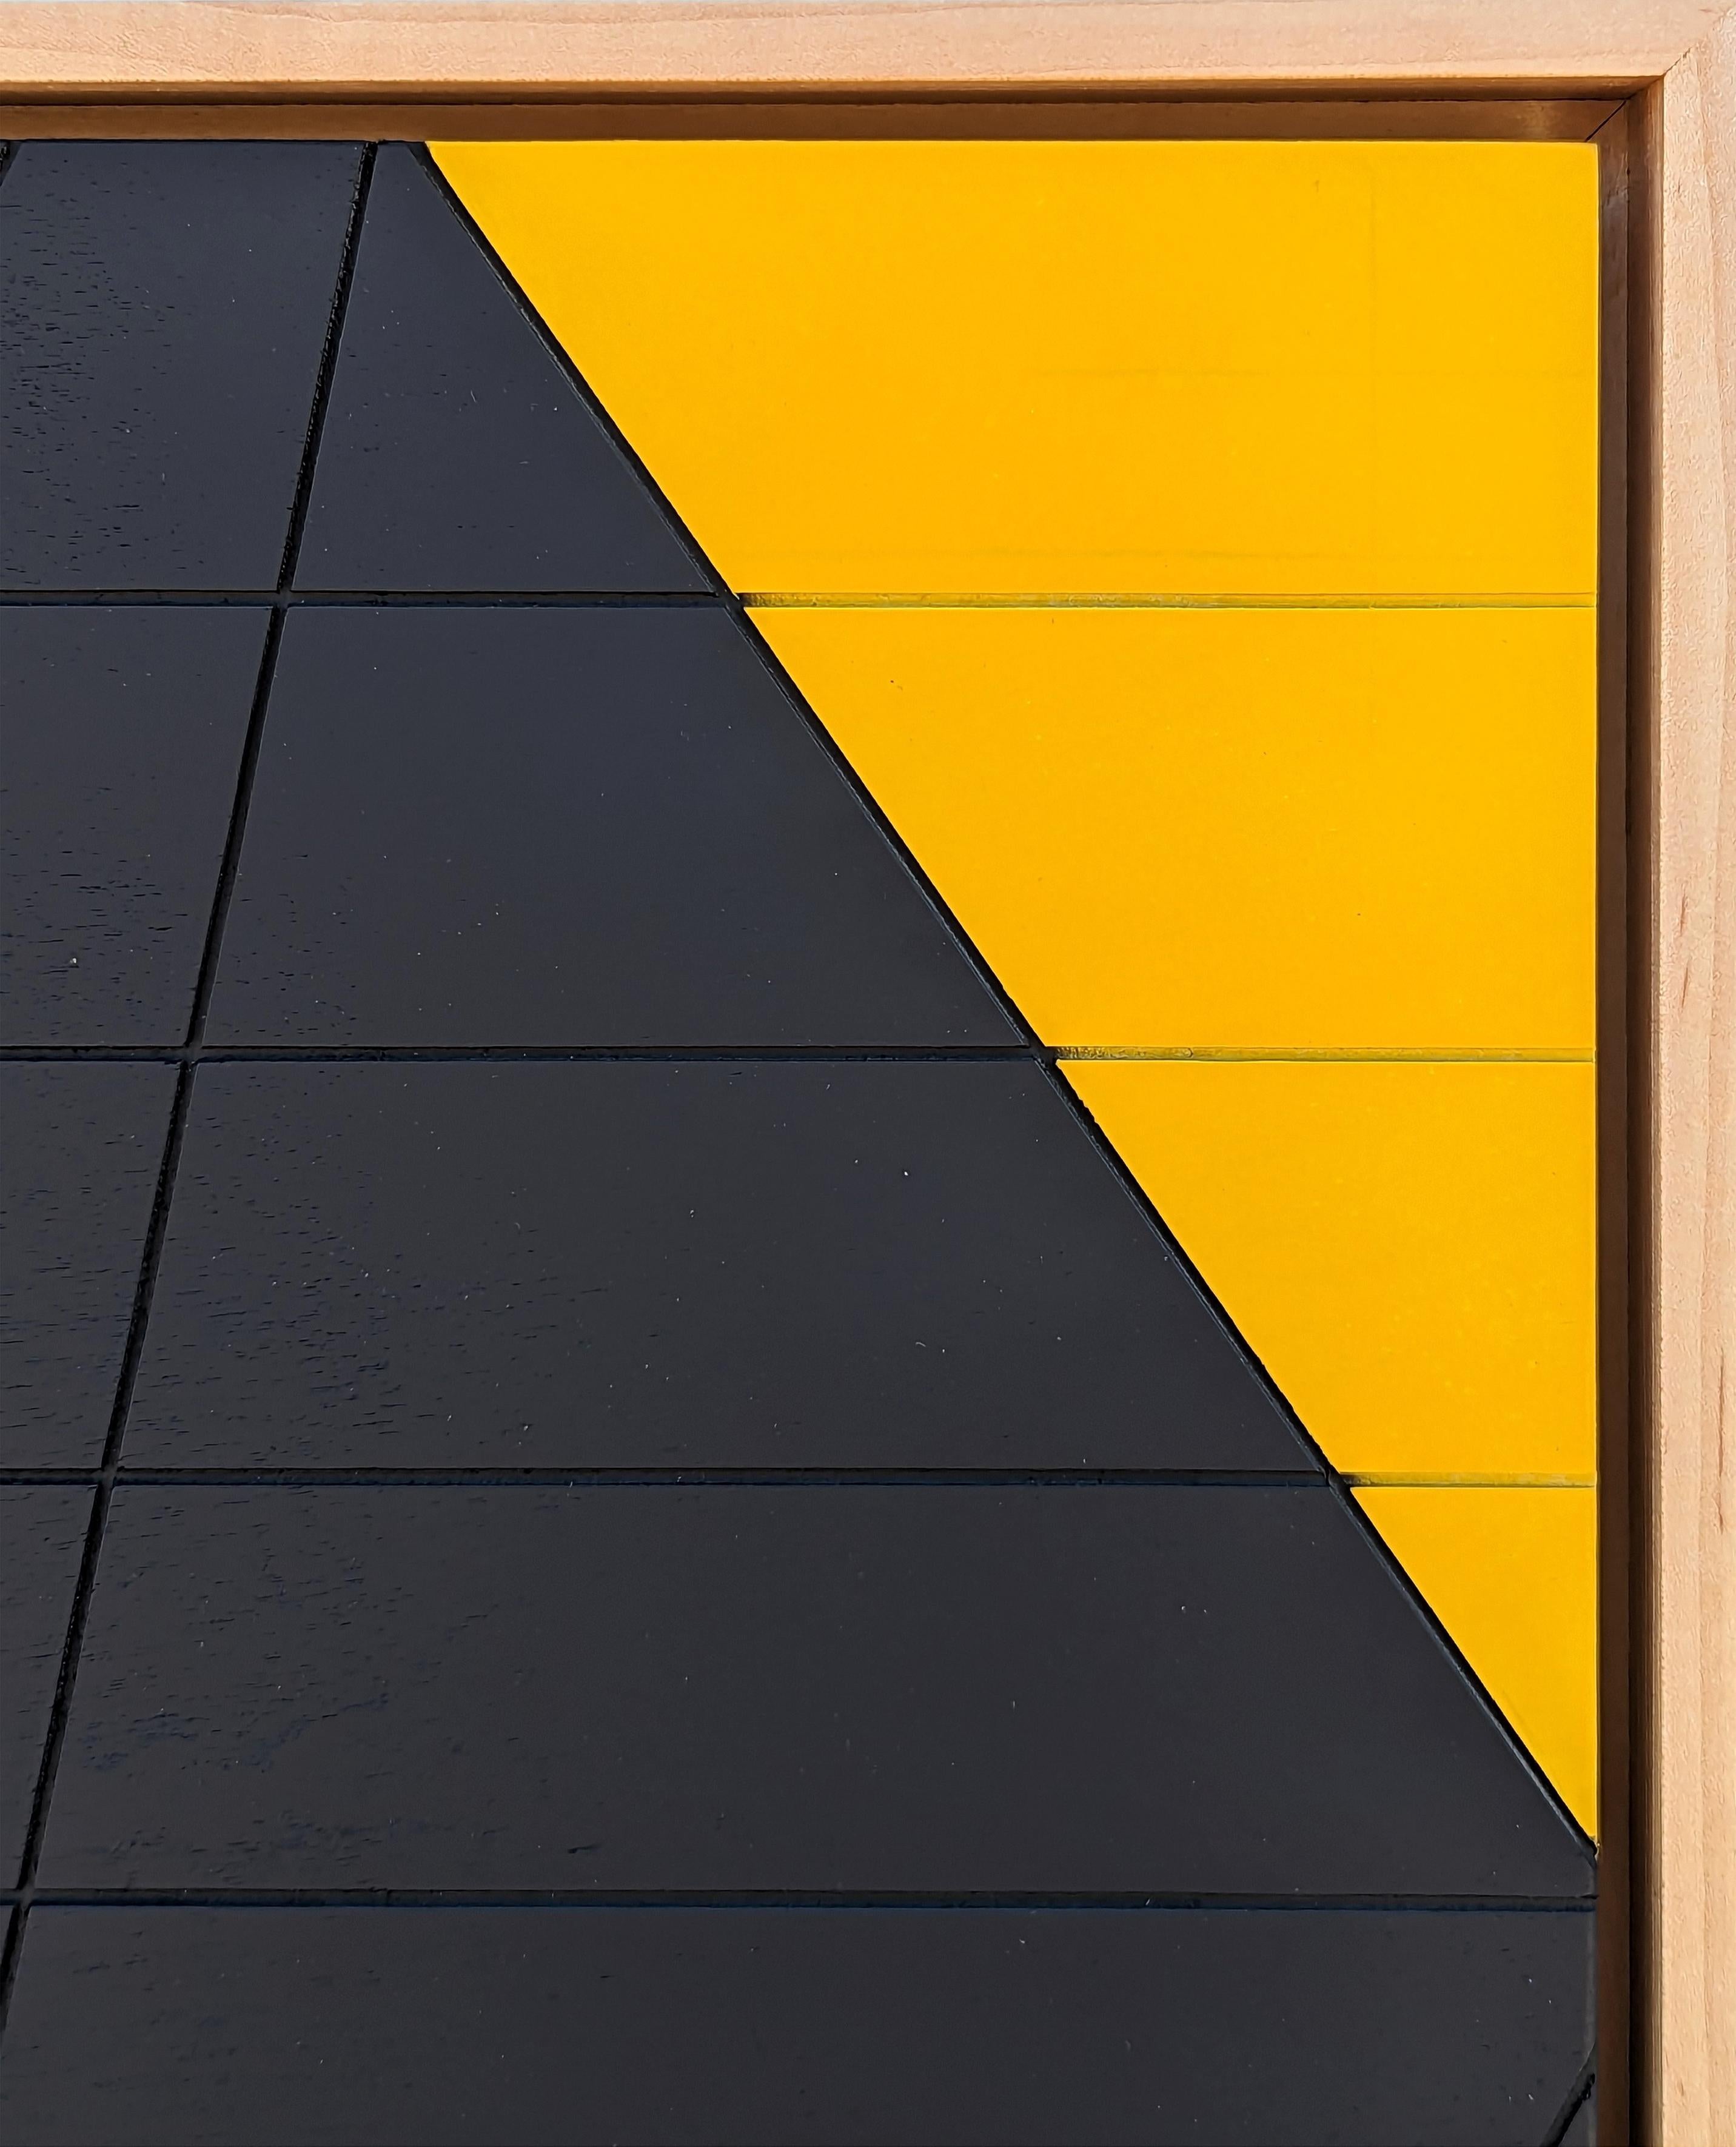 Black and yellow geometric abstract mixed media painting by Houston artist Matthew Reeves. Signed by the artist on the back. This vertical painting features horizontal grooves on a wood panel and painted black and yellow. Currently hung in a natural